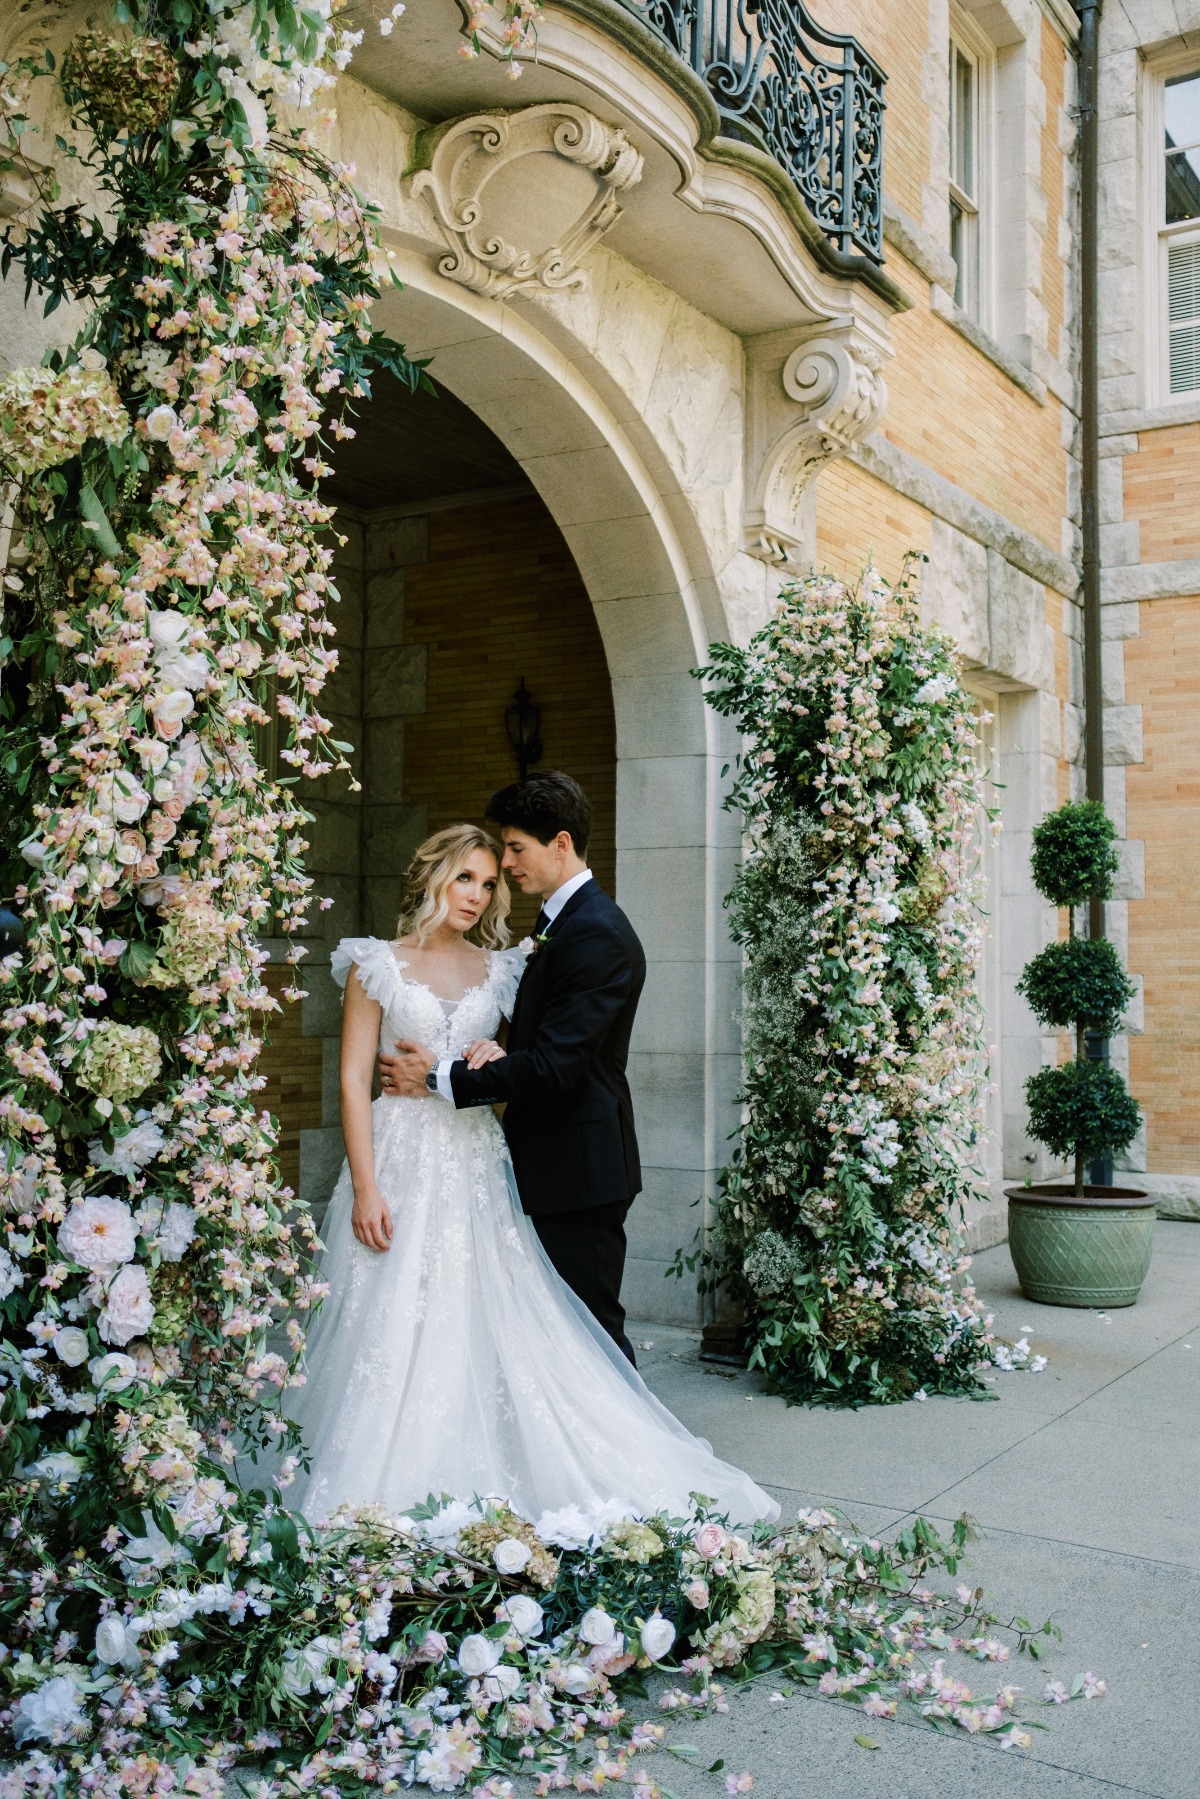 Bride and groom standing together in doorway in front of floral arch